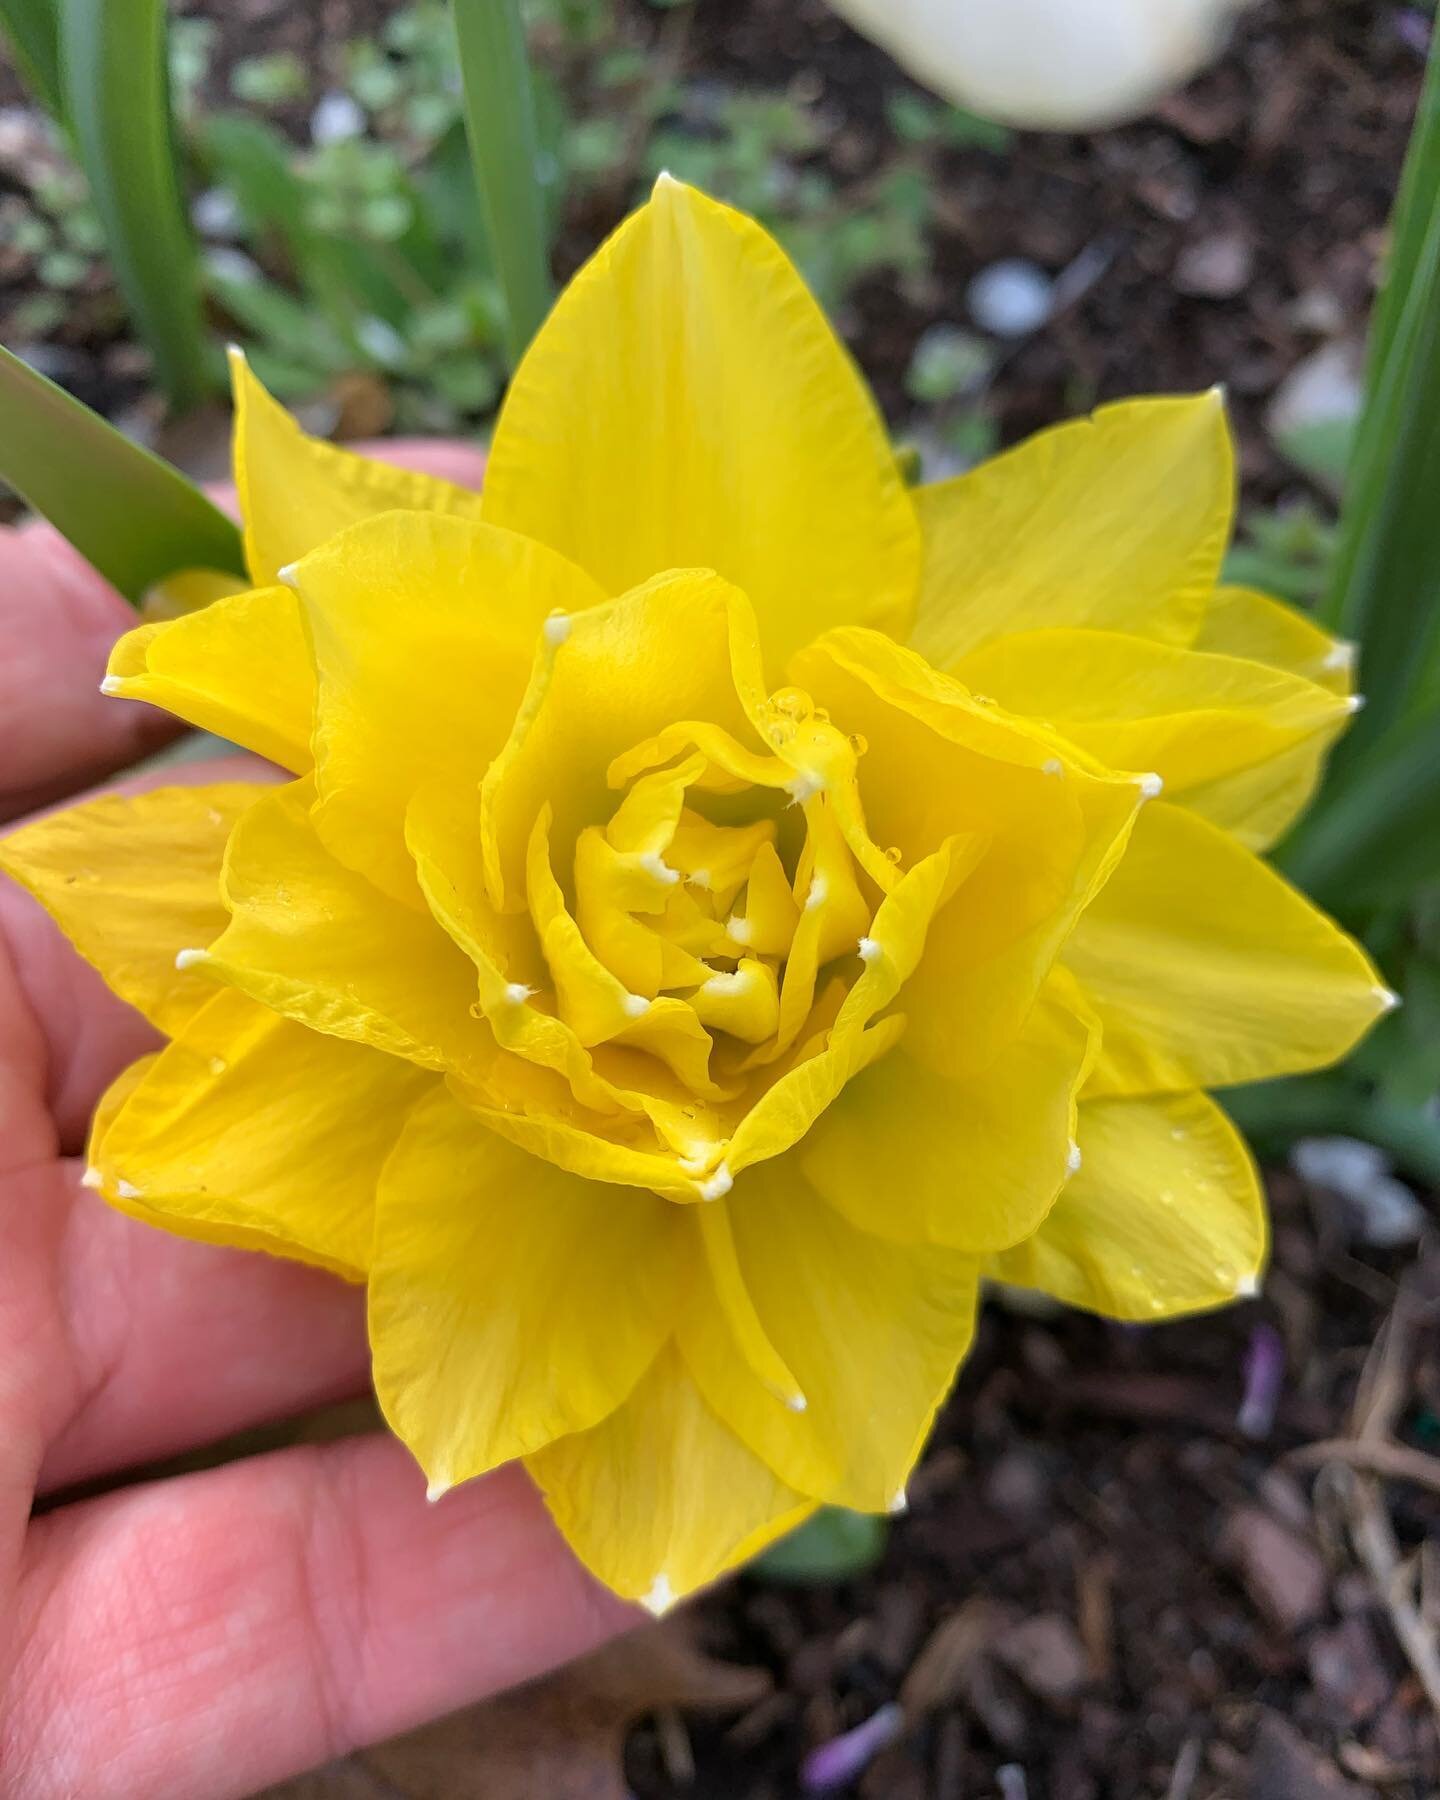 Blessed by the daffodil gods this morning 💐